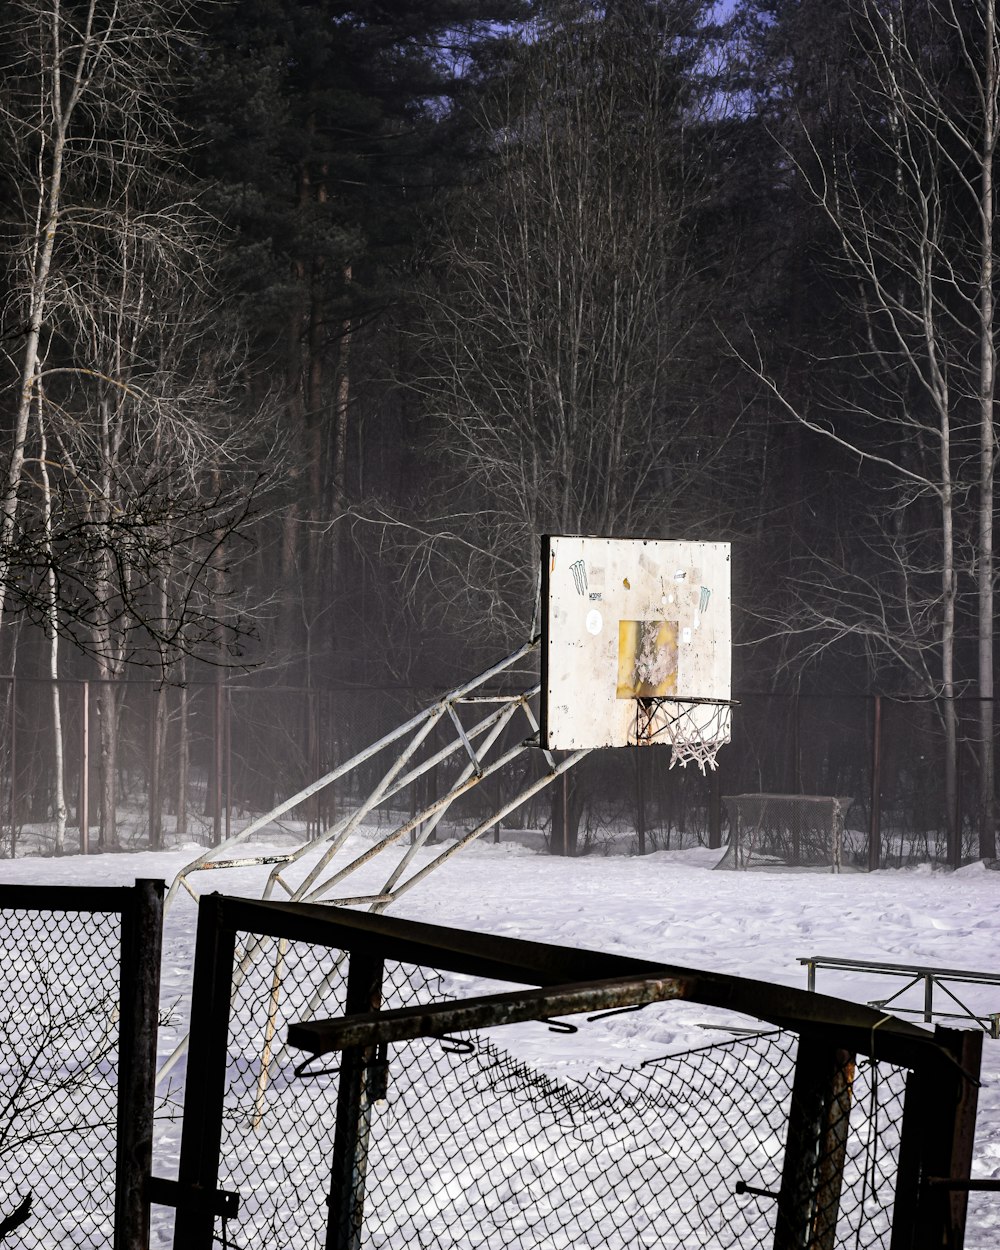 a basketball hoop in the middle of a snowy field